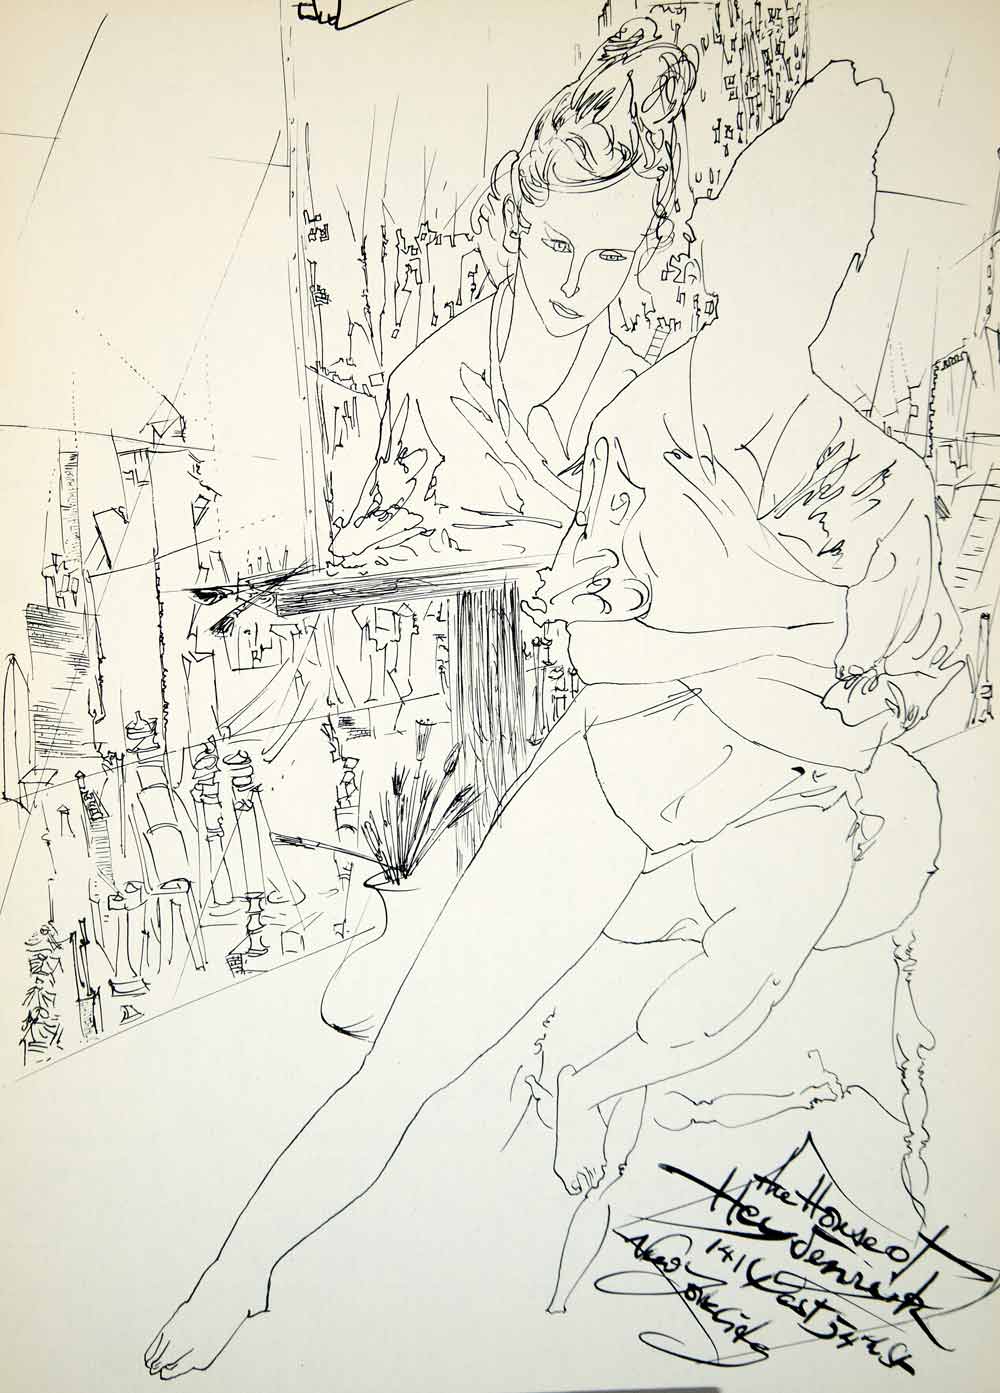 1958 Lithograph Peter Takal Art House of Heydenryk Nude Female Figure New York